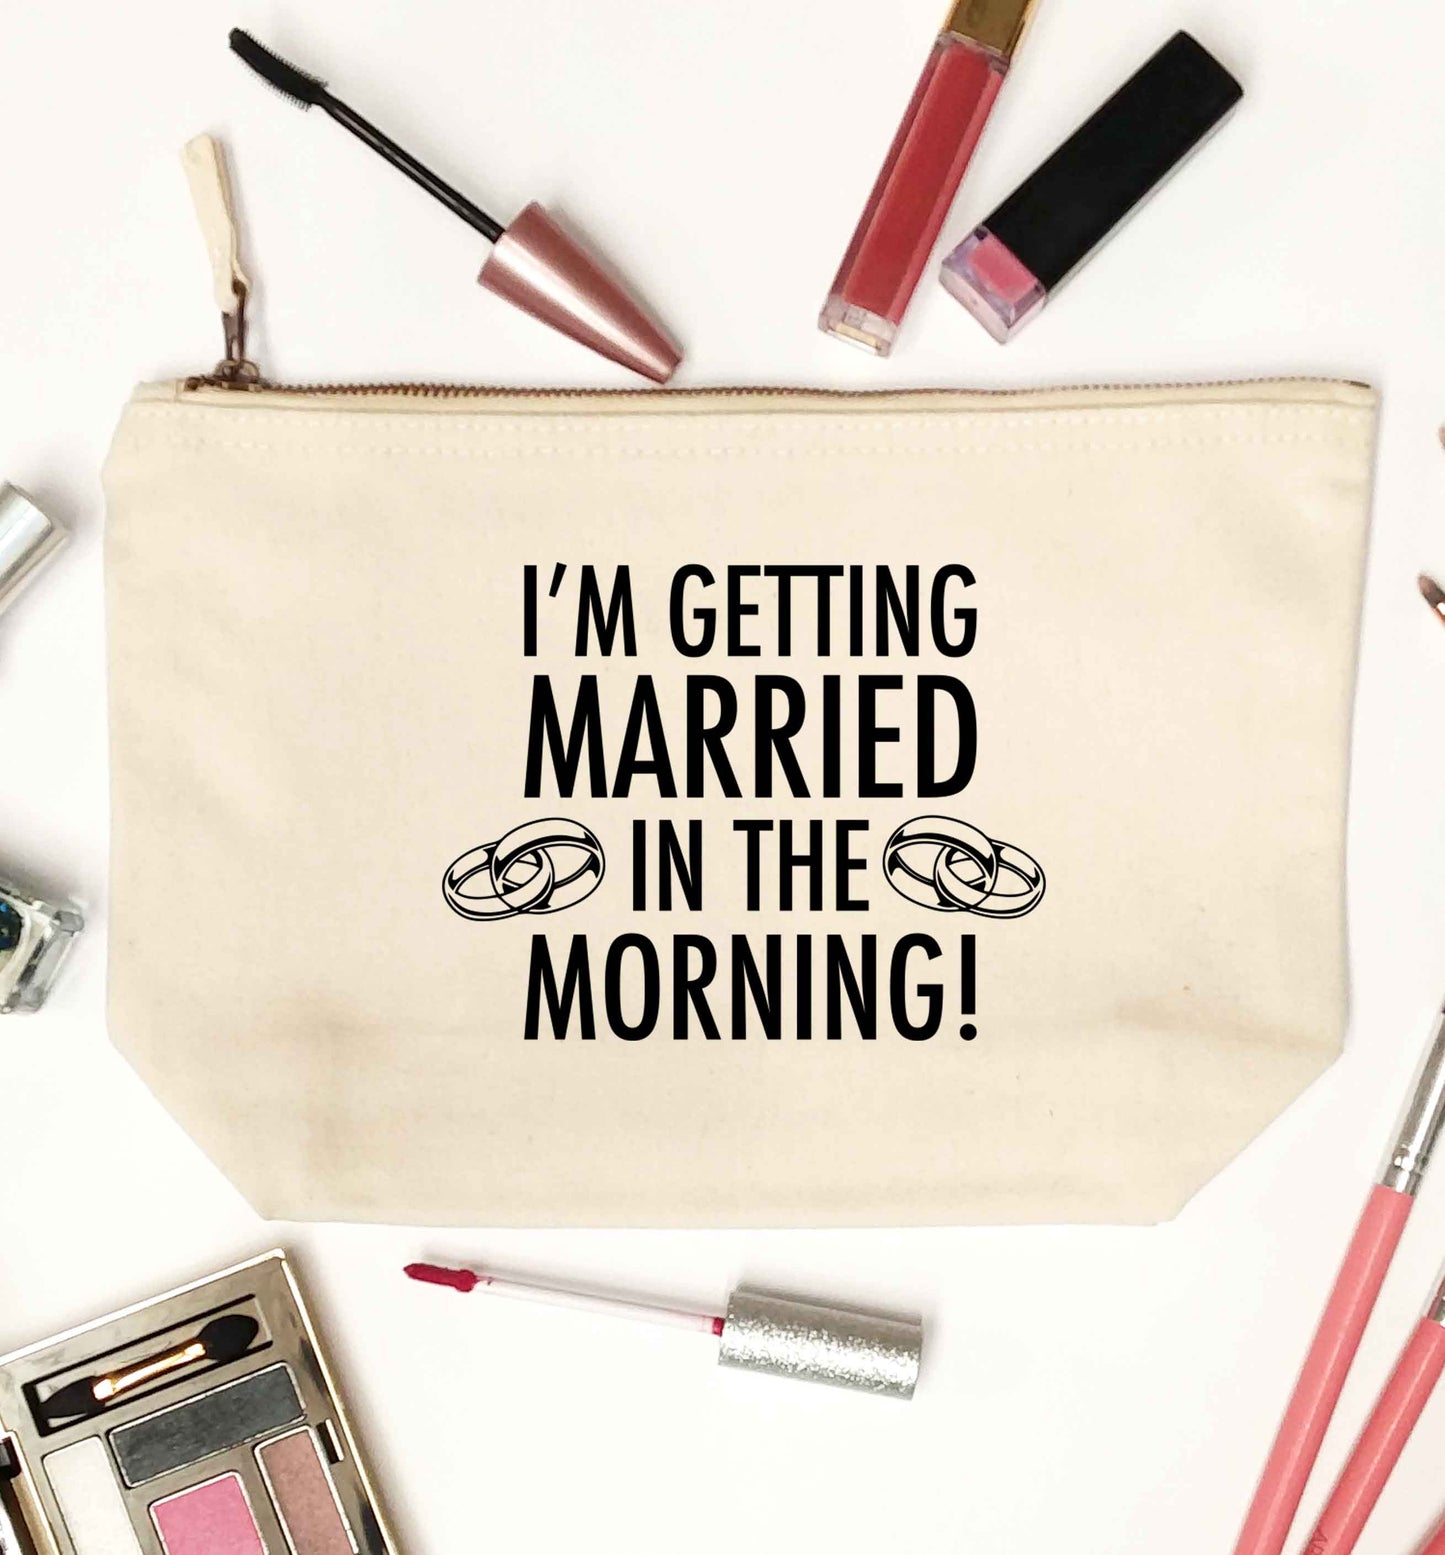 I'm getting married in the morning! natural makeup bag